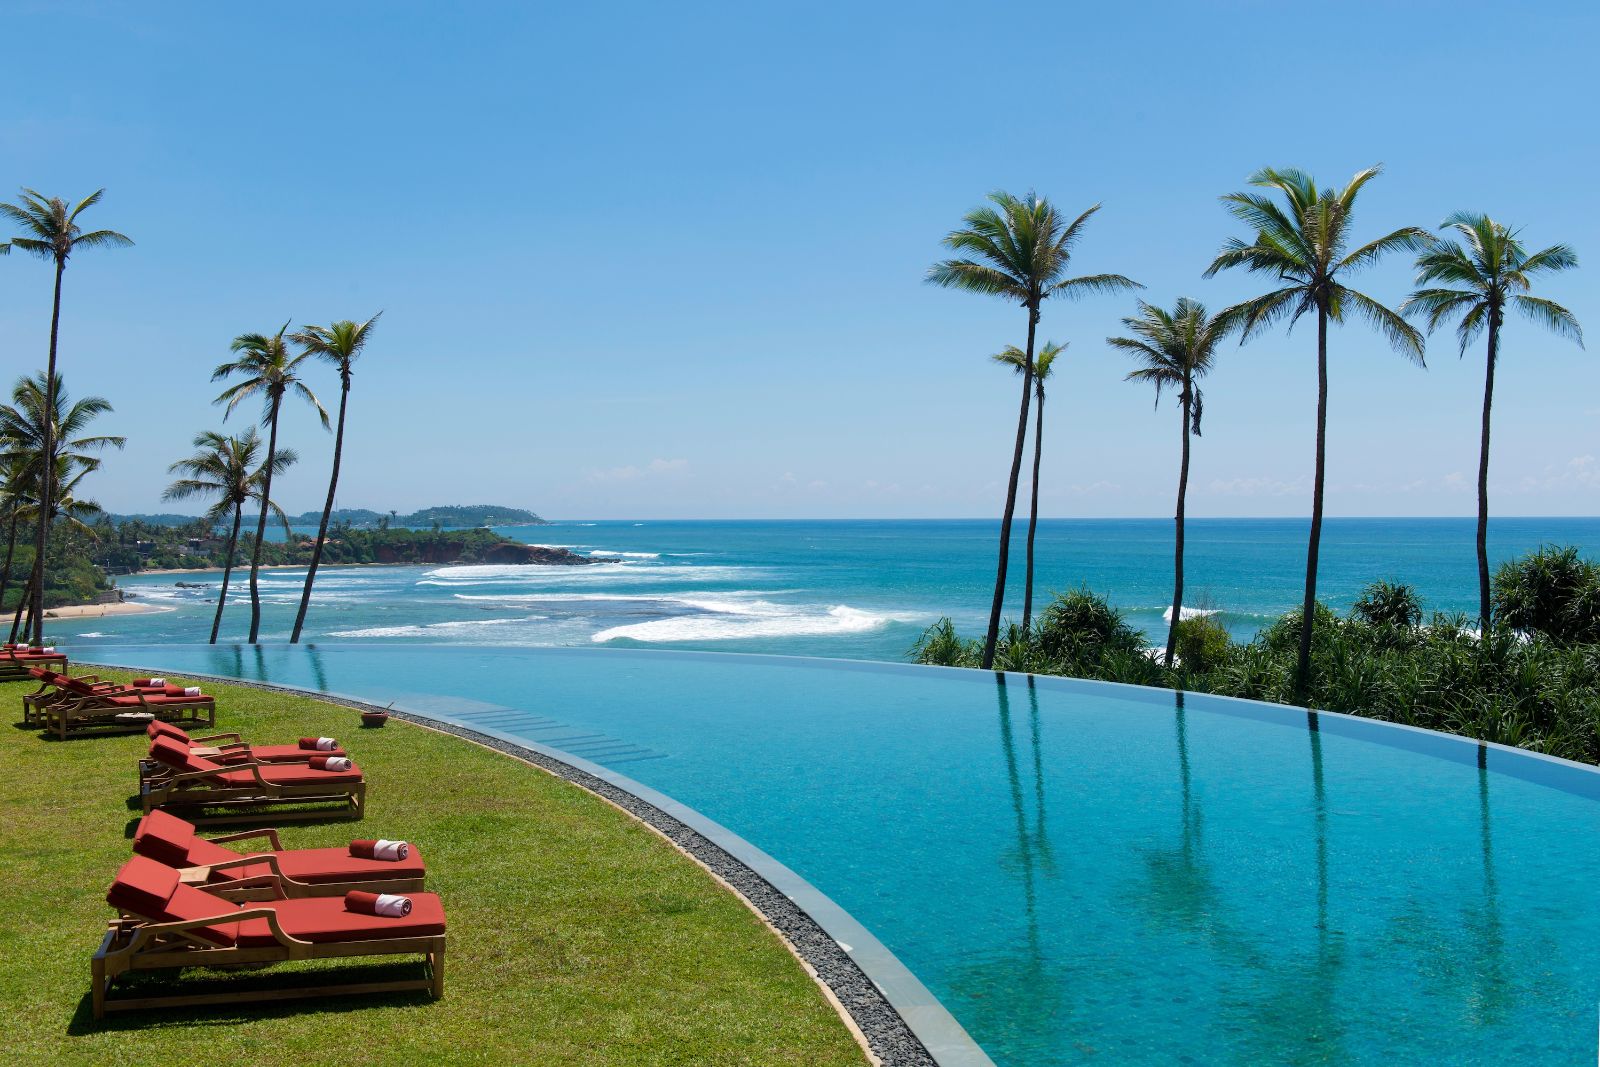 Poolside at Cape Weligama in Sri Lanka's southern province